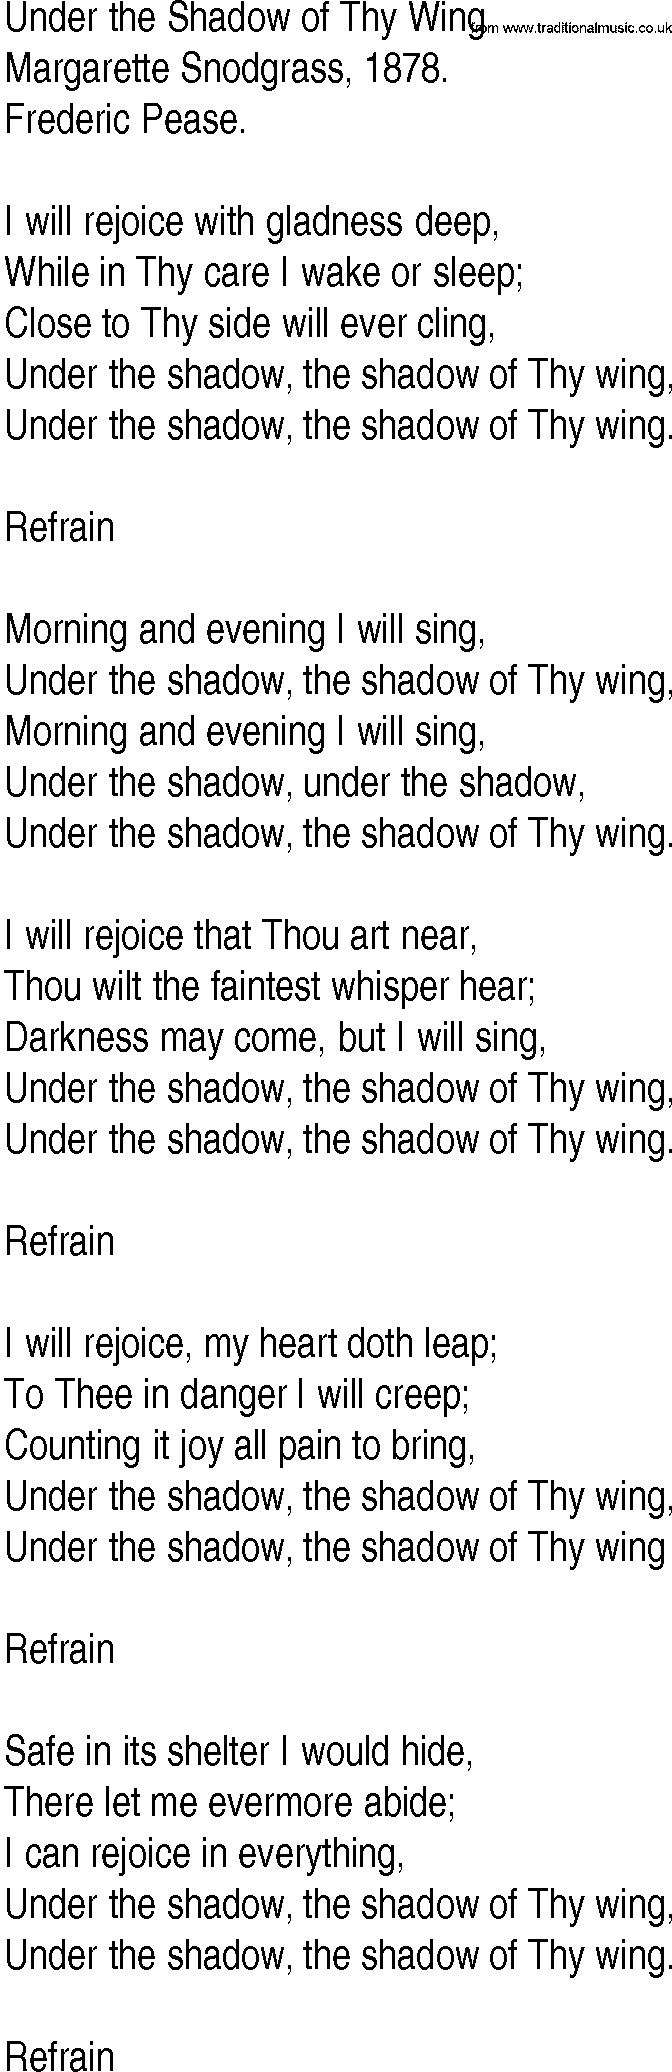 Hymn and Gospel Song: Under the Shadow of Thy Wing by Margarette Snodgrass lyrics